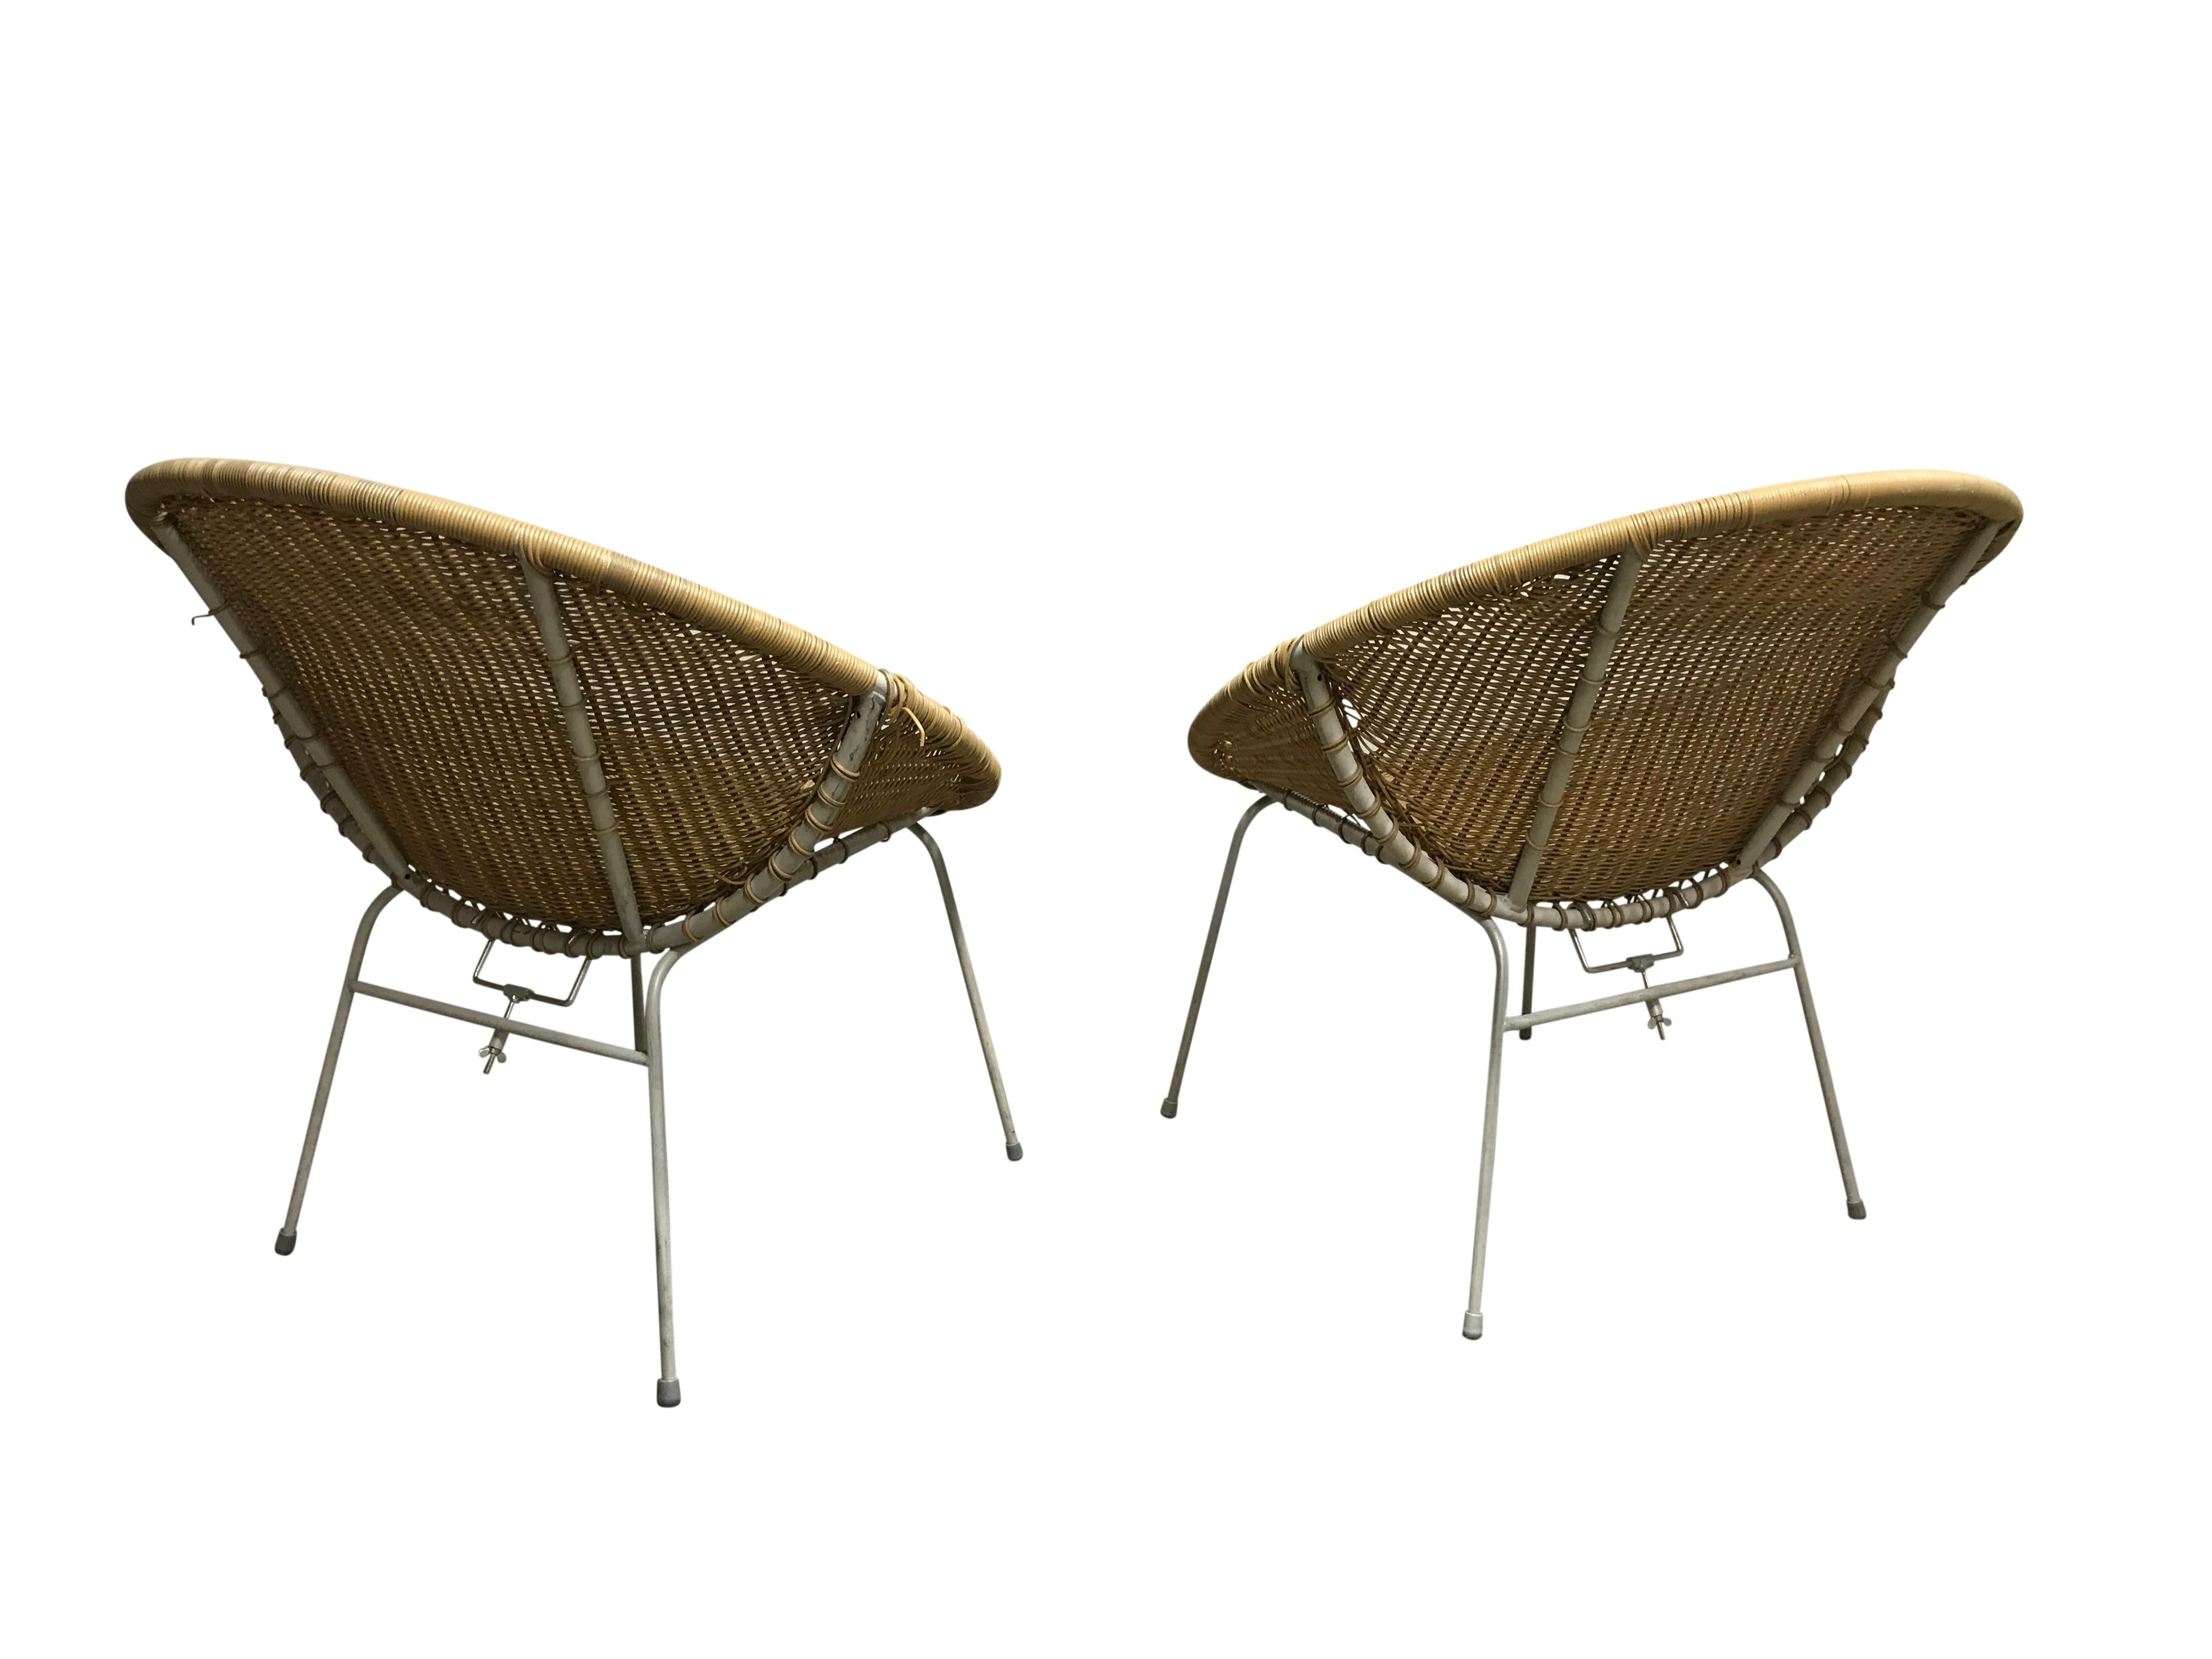 Pair of 1970s rattan lounge chairs.

The chairs are elegantly shaped and have a white metal frame.

Good overall condition.

The chairs are quite comfortable and suitable for in-and outdoor use.

1970s - France

Dimensions:
Height